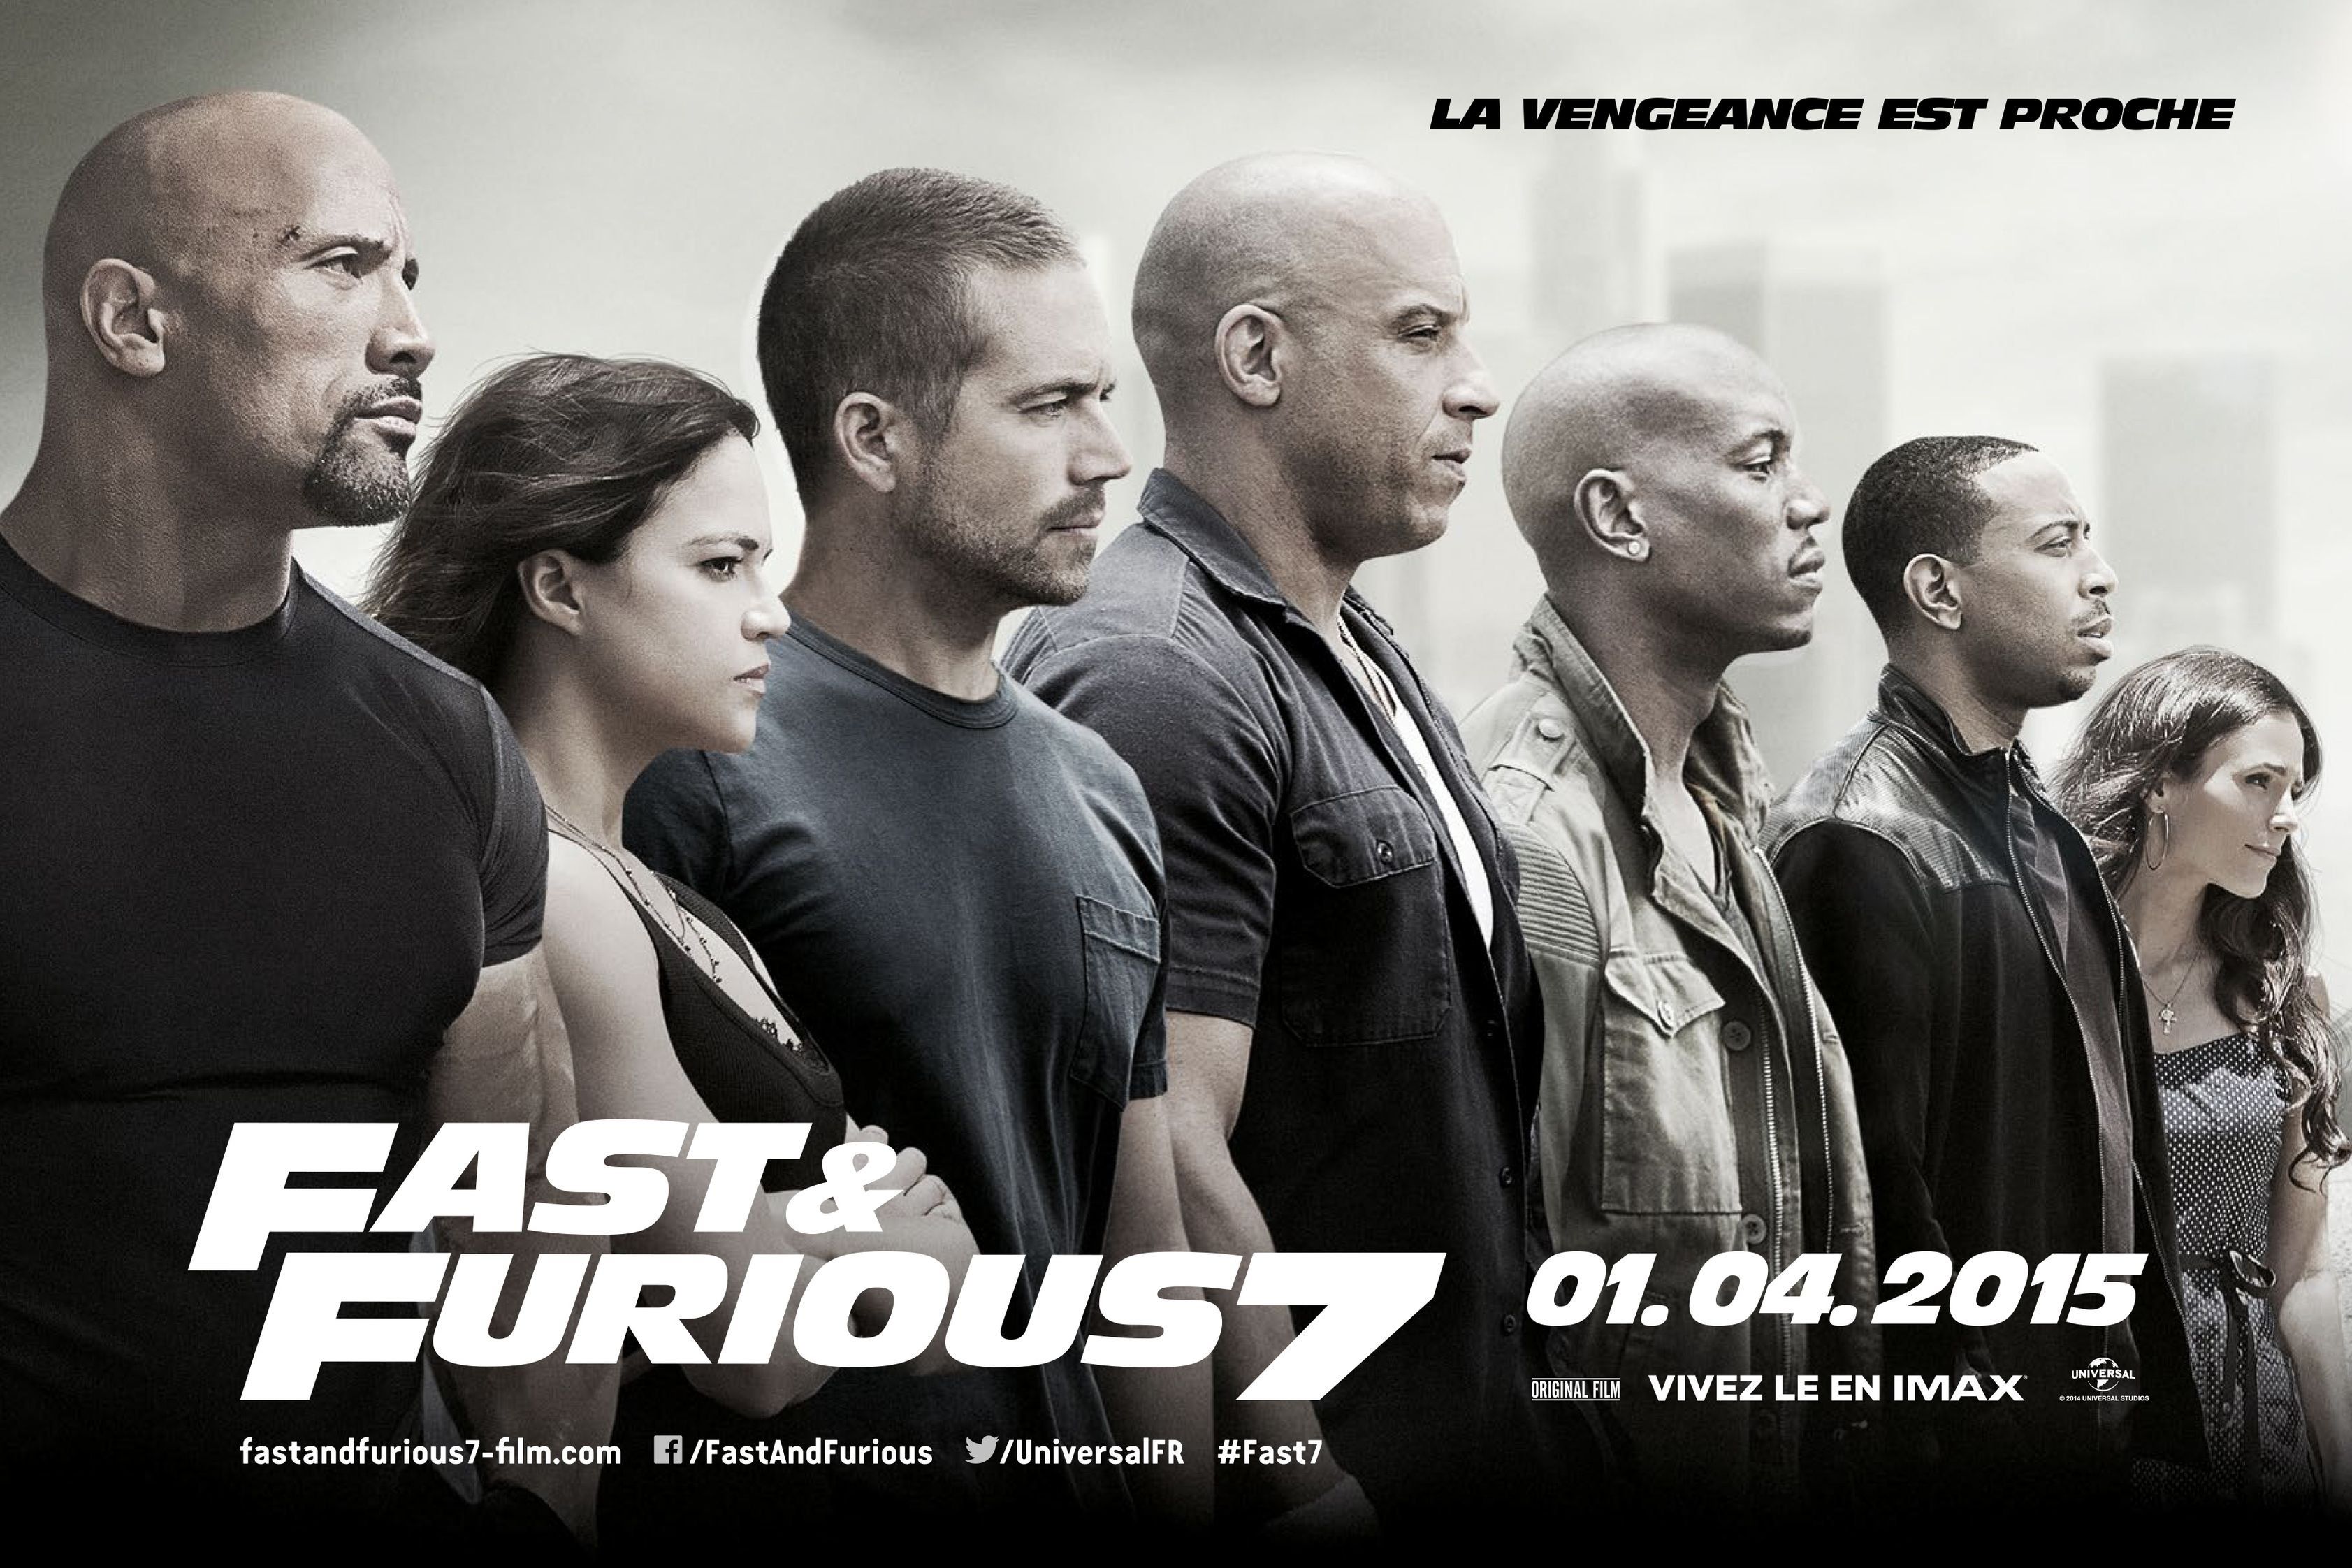 FAST FURIOUS 7 action thriller race racing crime ff7 1ff7 poster